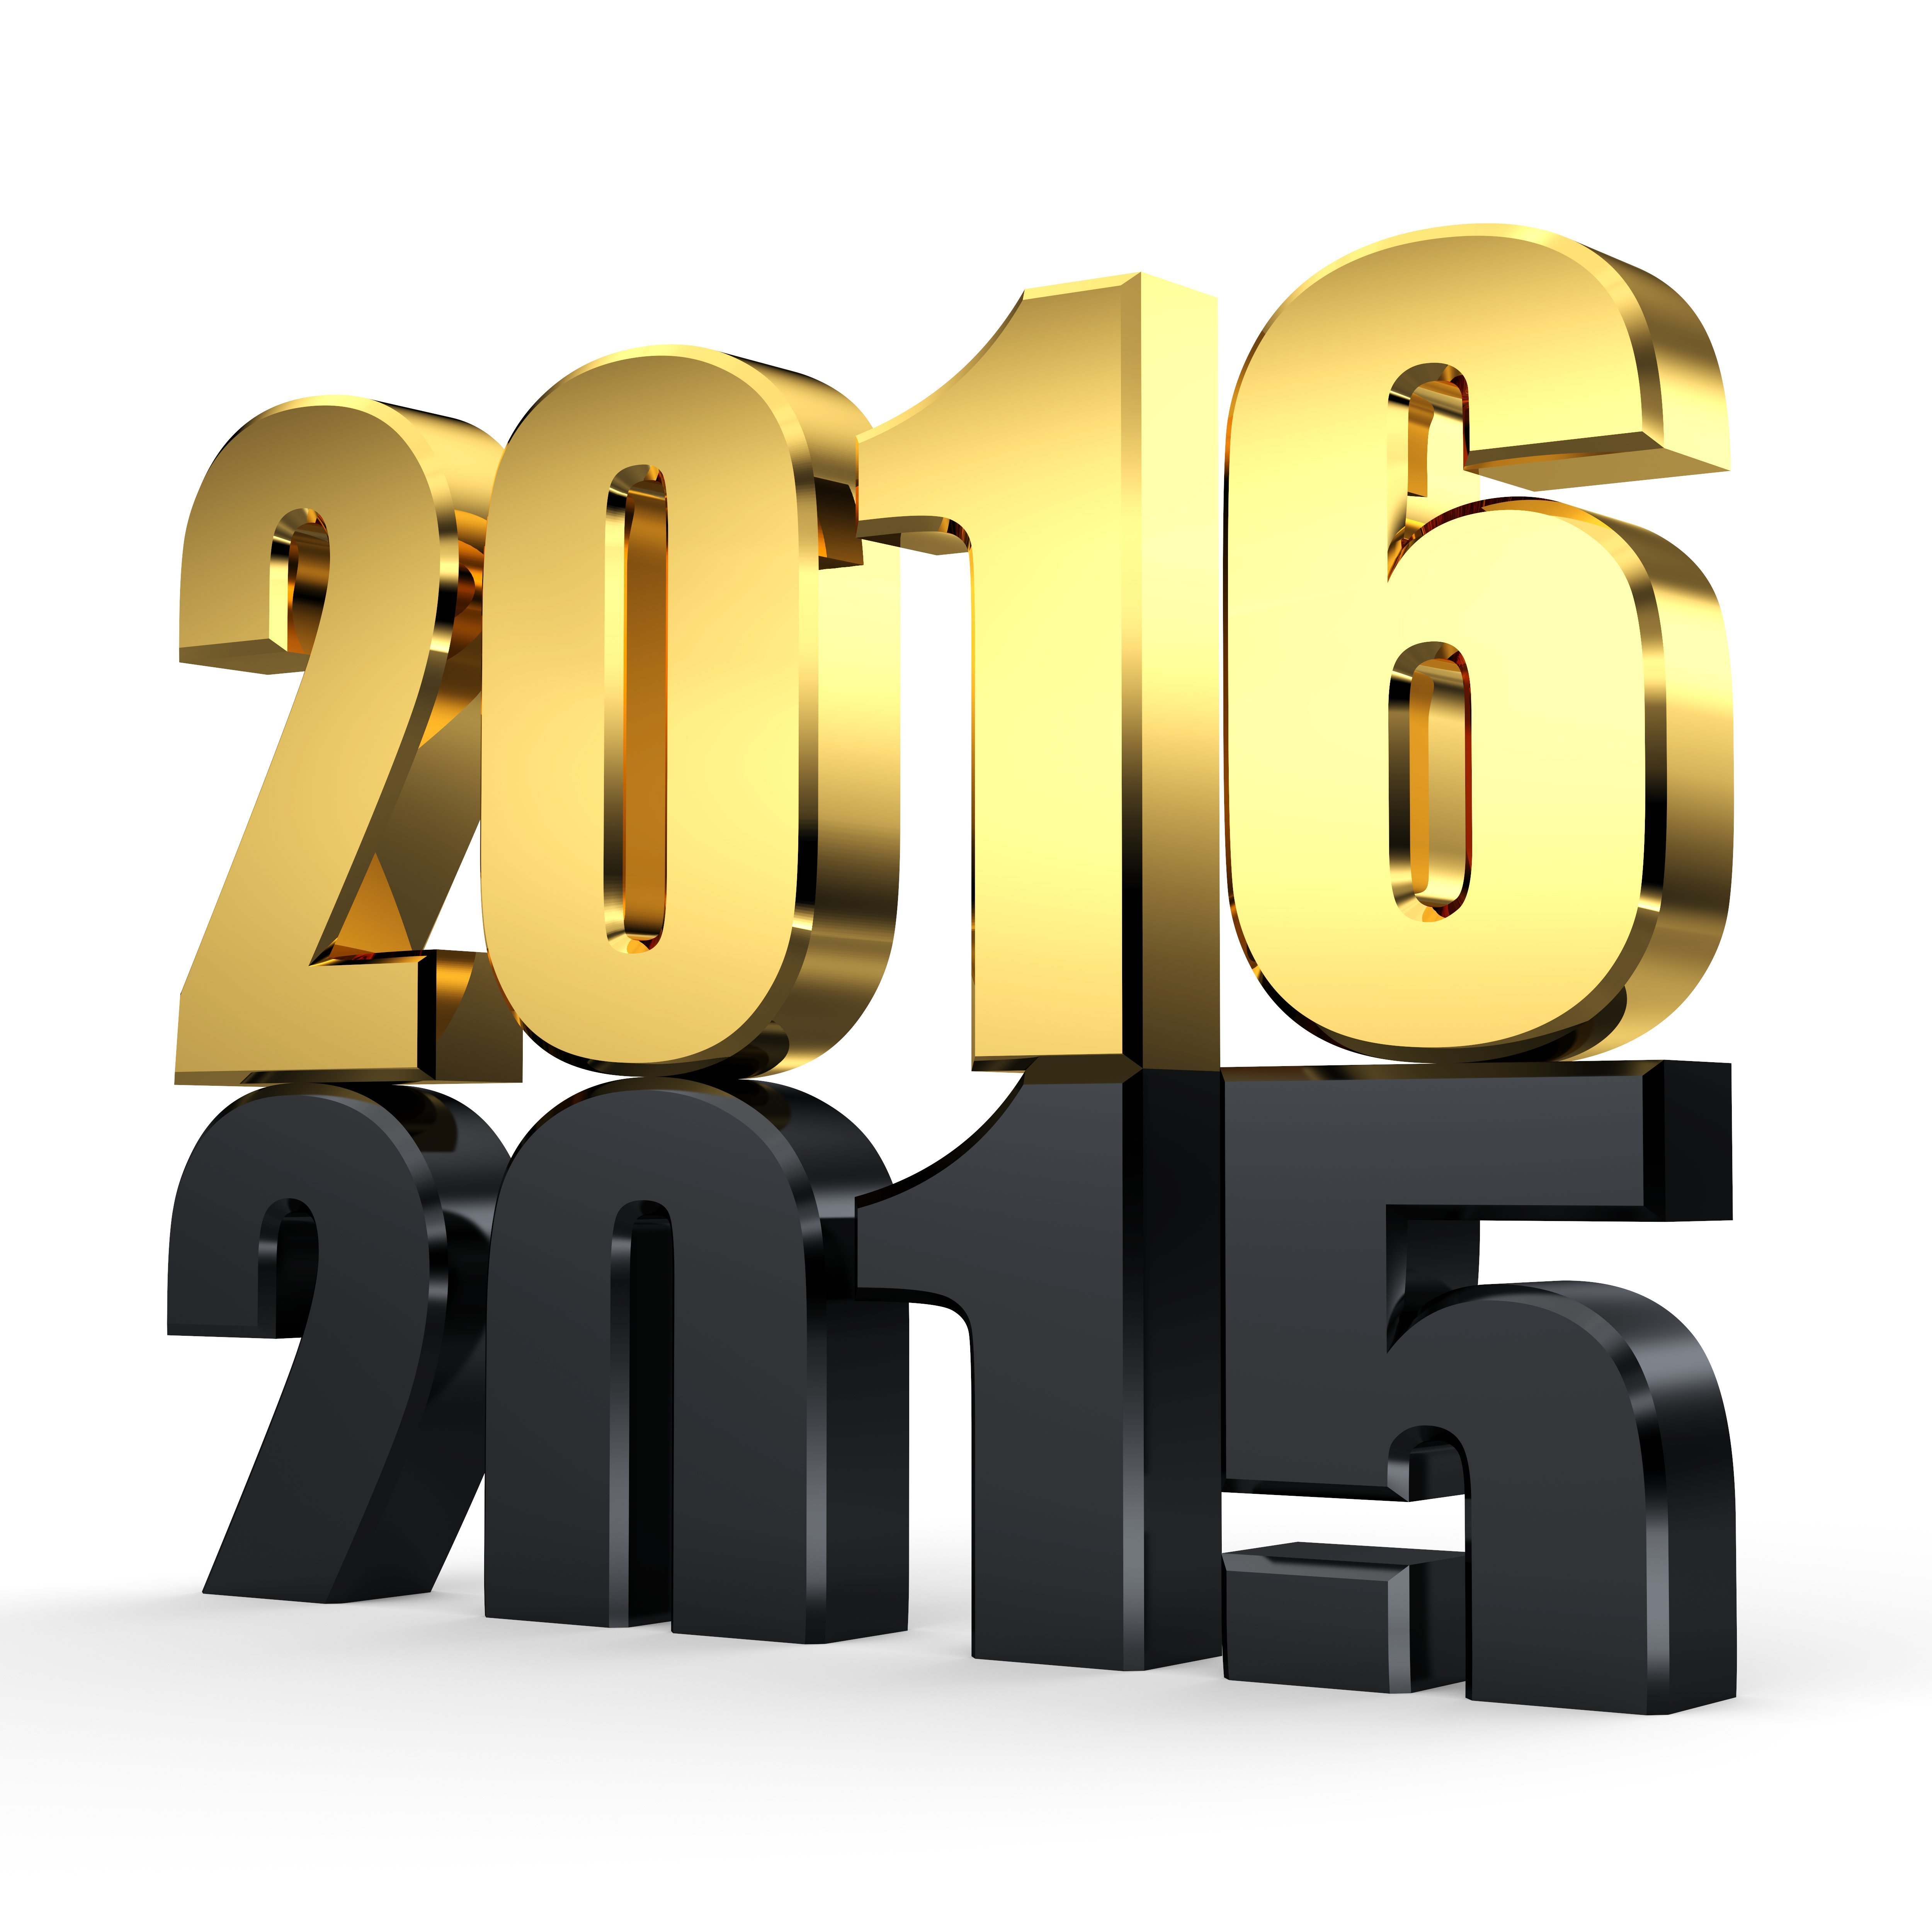 SmarTech Markets Publishing has announced its AM predictions for 2016.